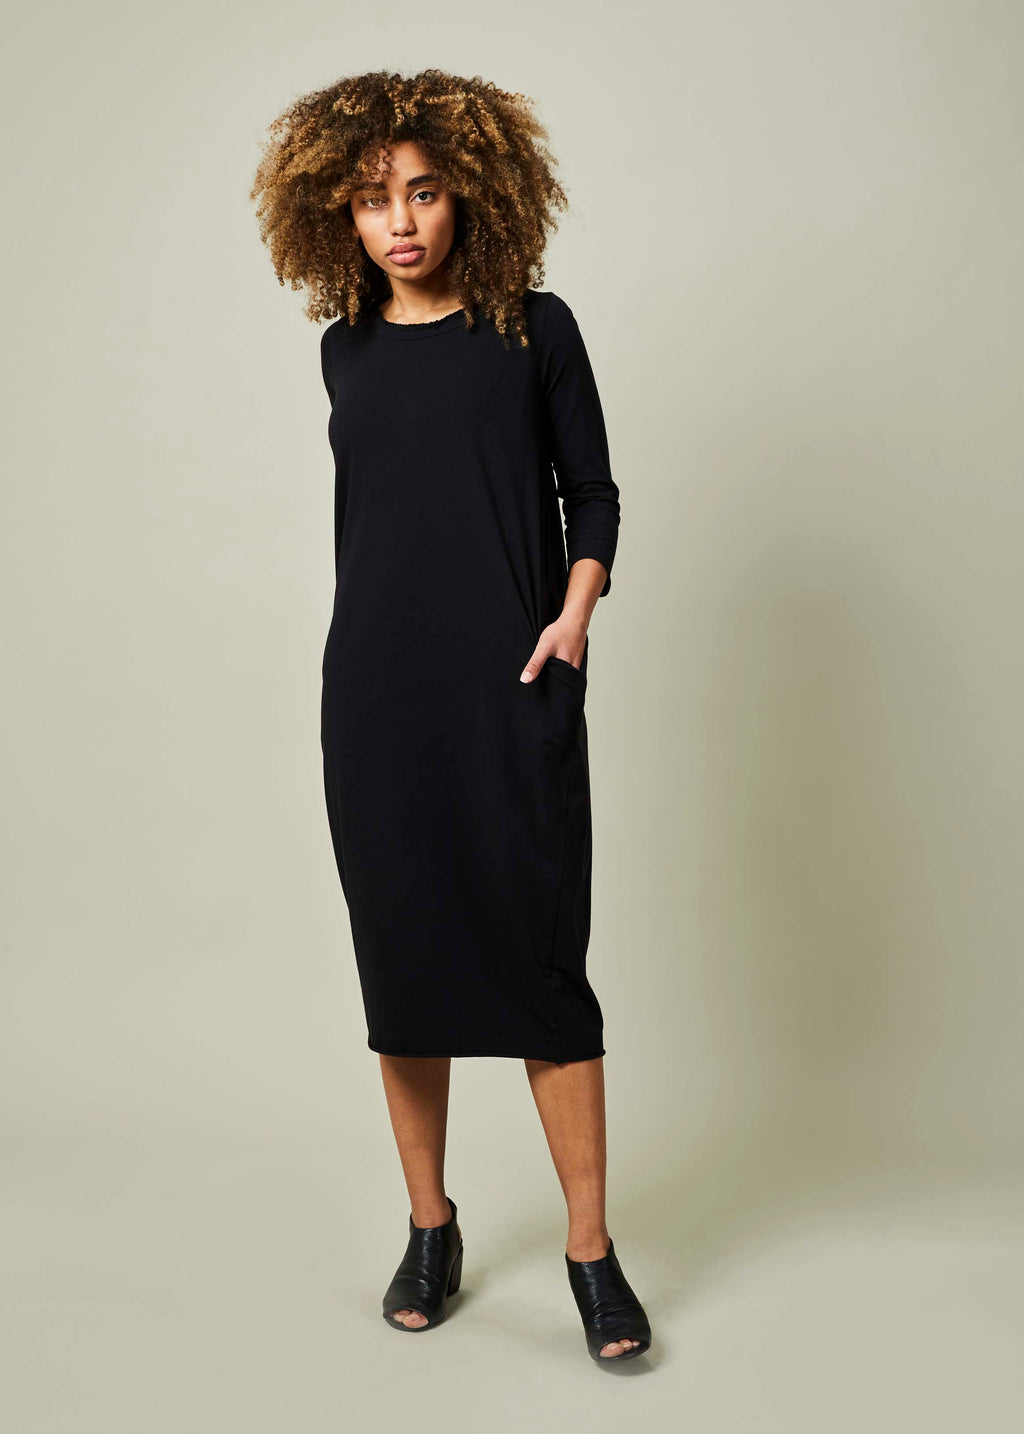 Shop Dresses by Curated Luxury Designers – Tagged 